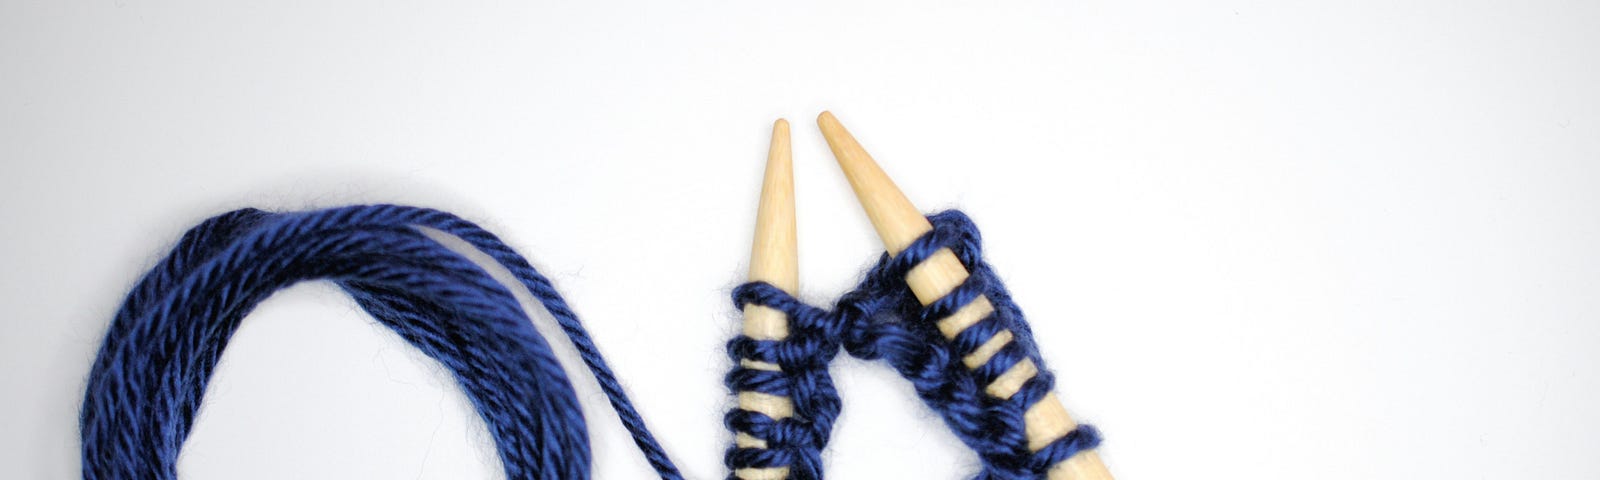 knitting with blue yarn and ivory needles